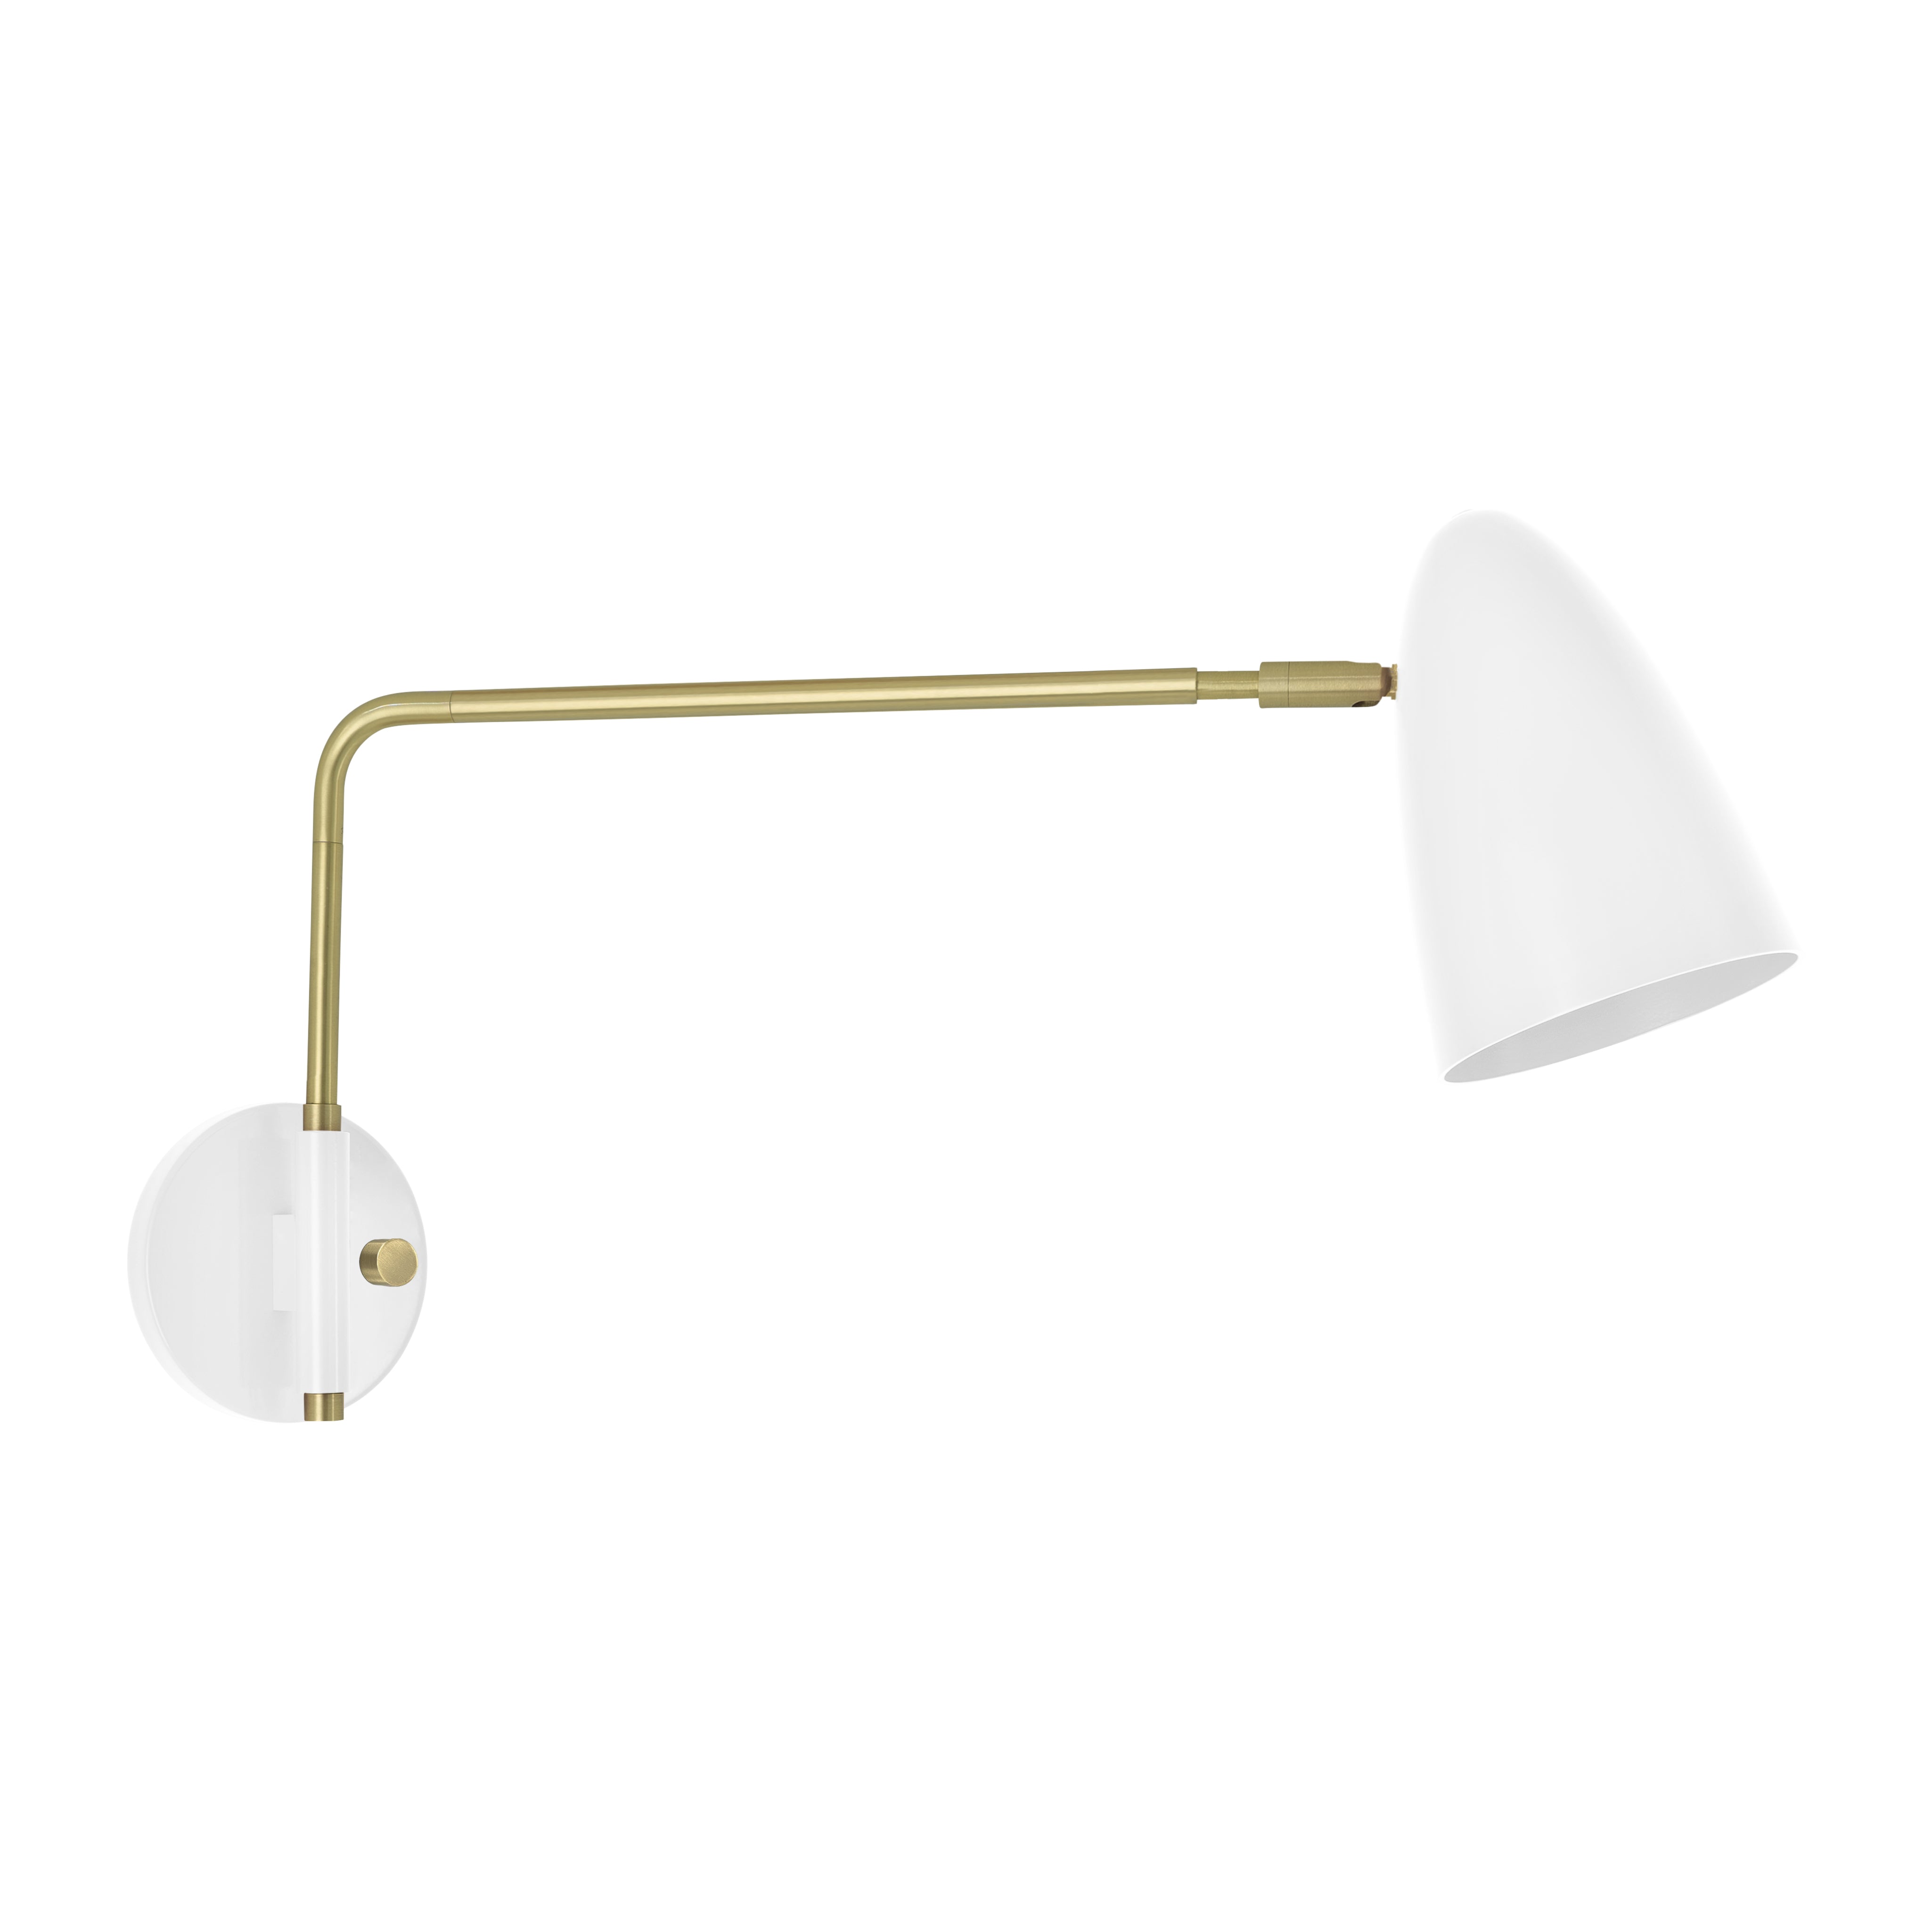 Brass and white color Boom Swing Arm sconce Dutton Brown lighting